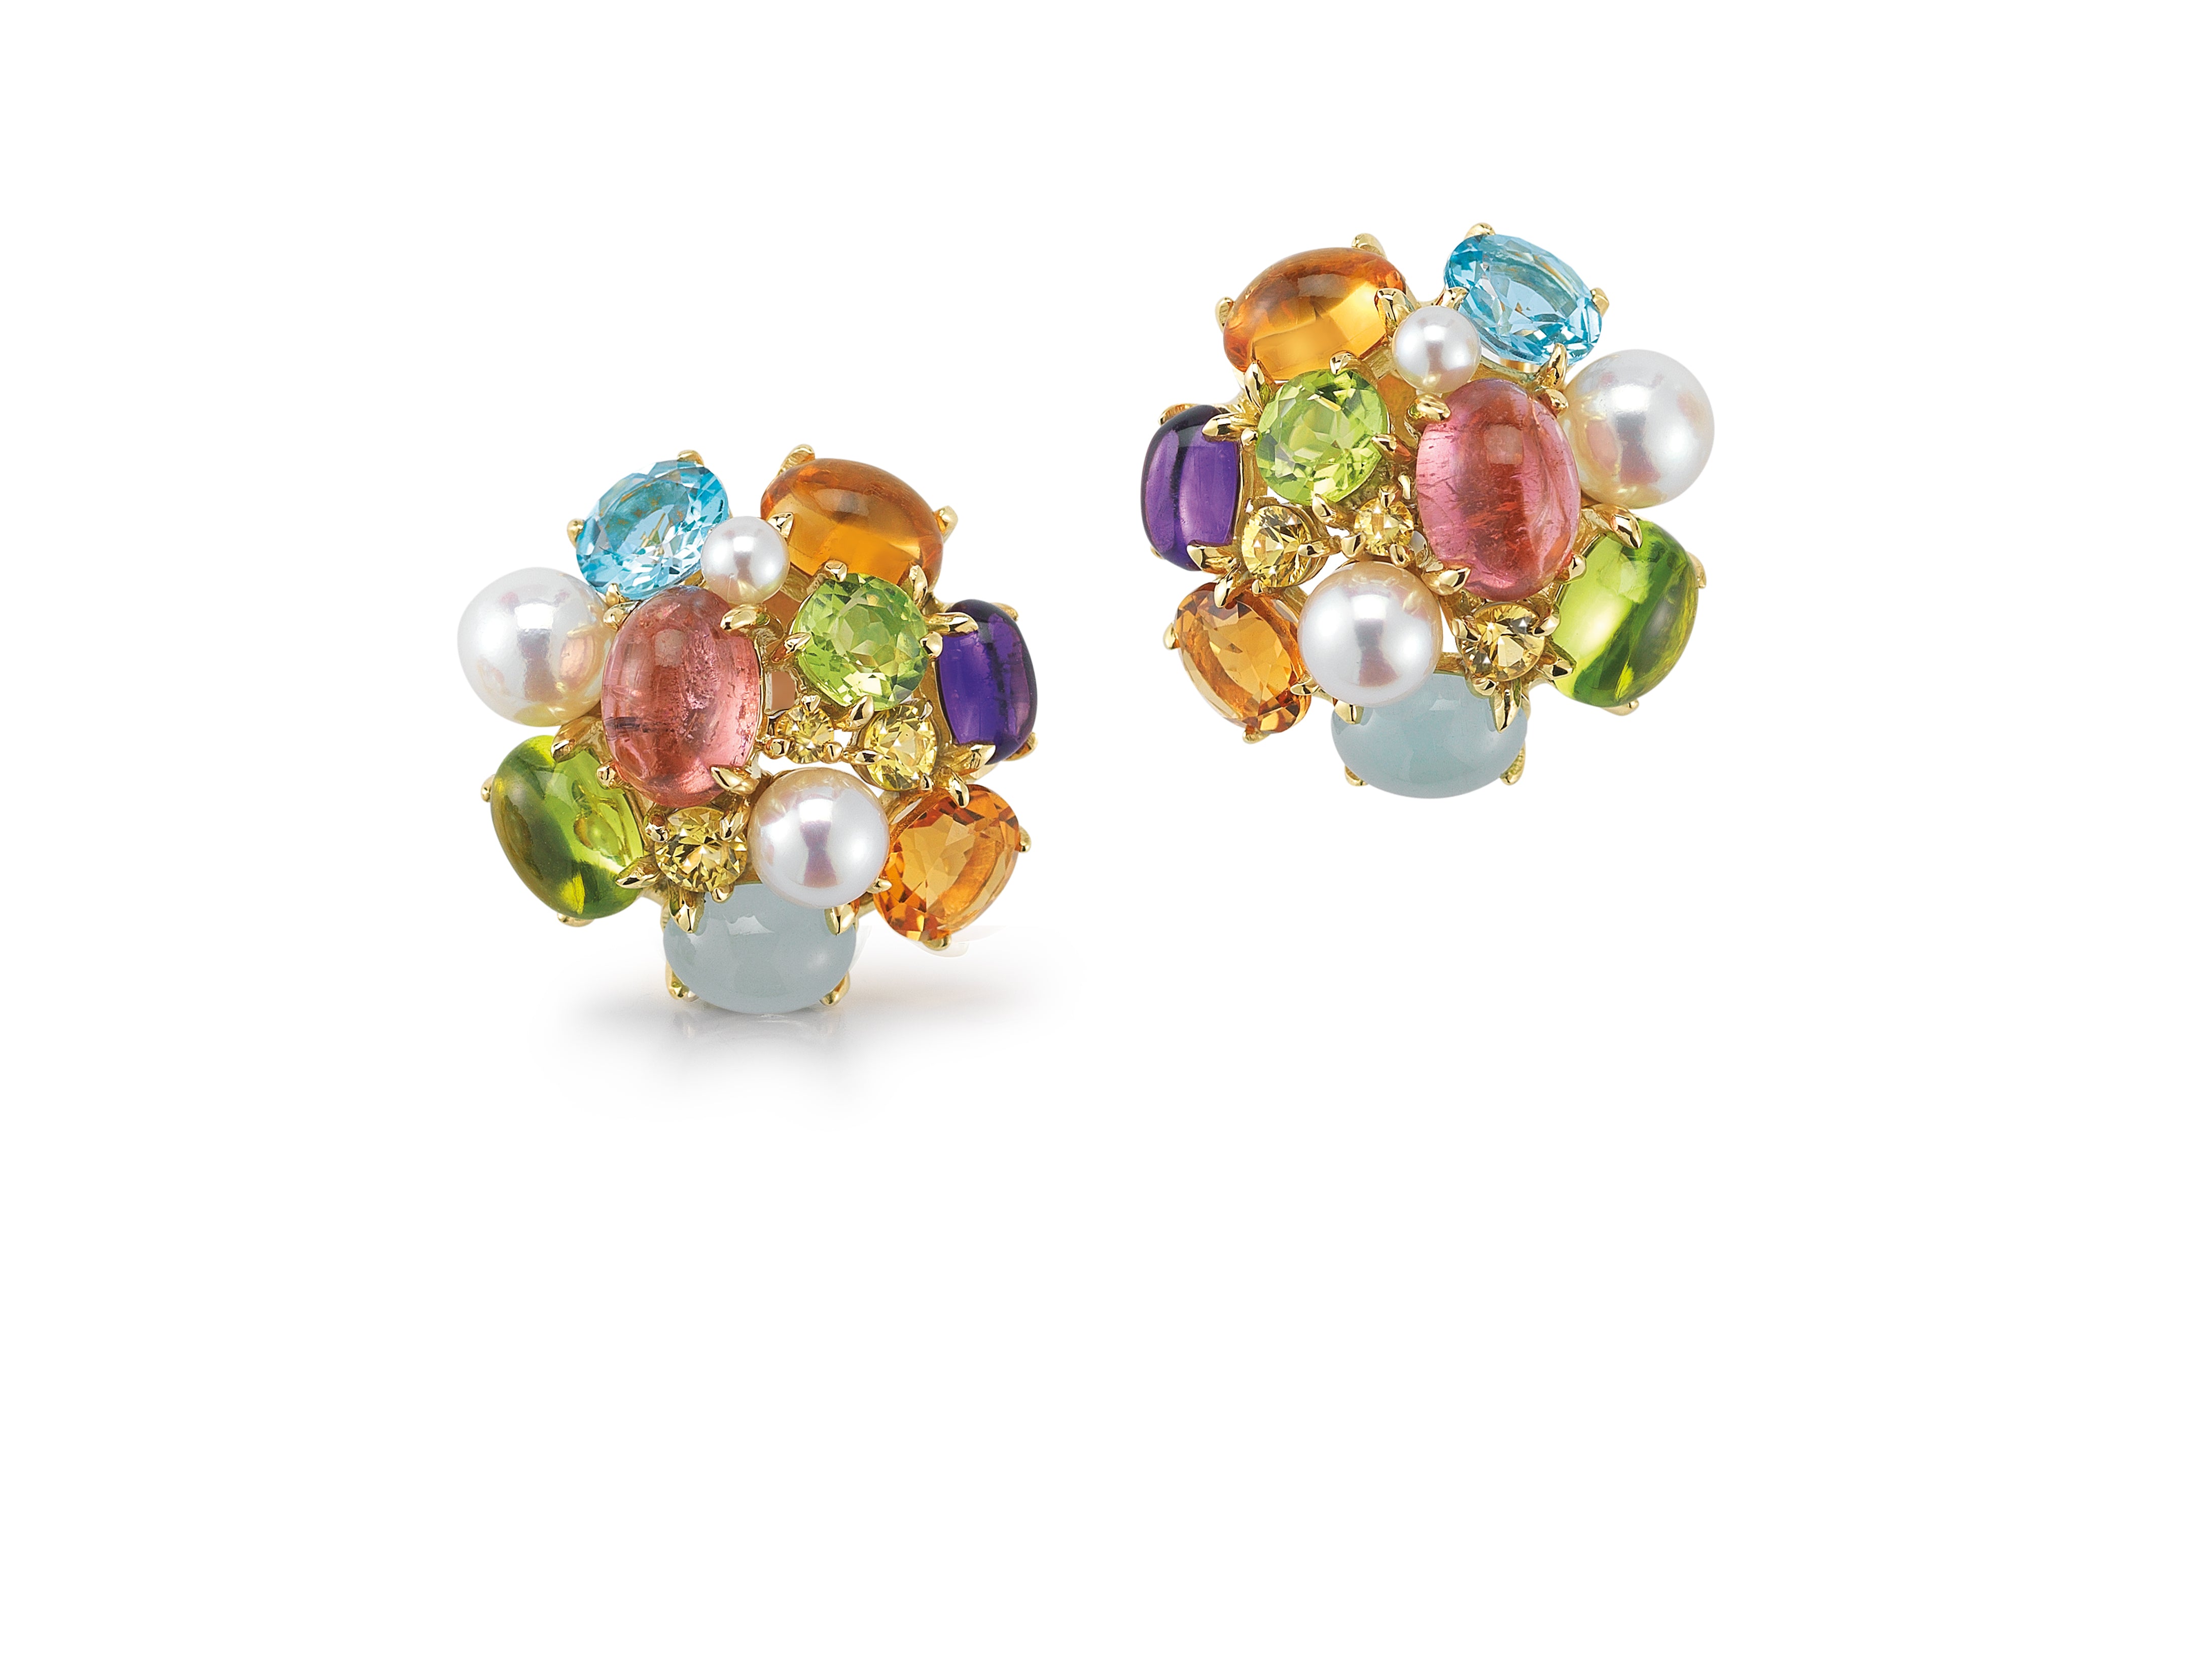 A pair of Small Bubble Earrings with Multi-color precious, Semi-precious stone, and Pearl set in 18K Yellow Gold. Signed Seaman Schepps.